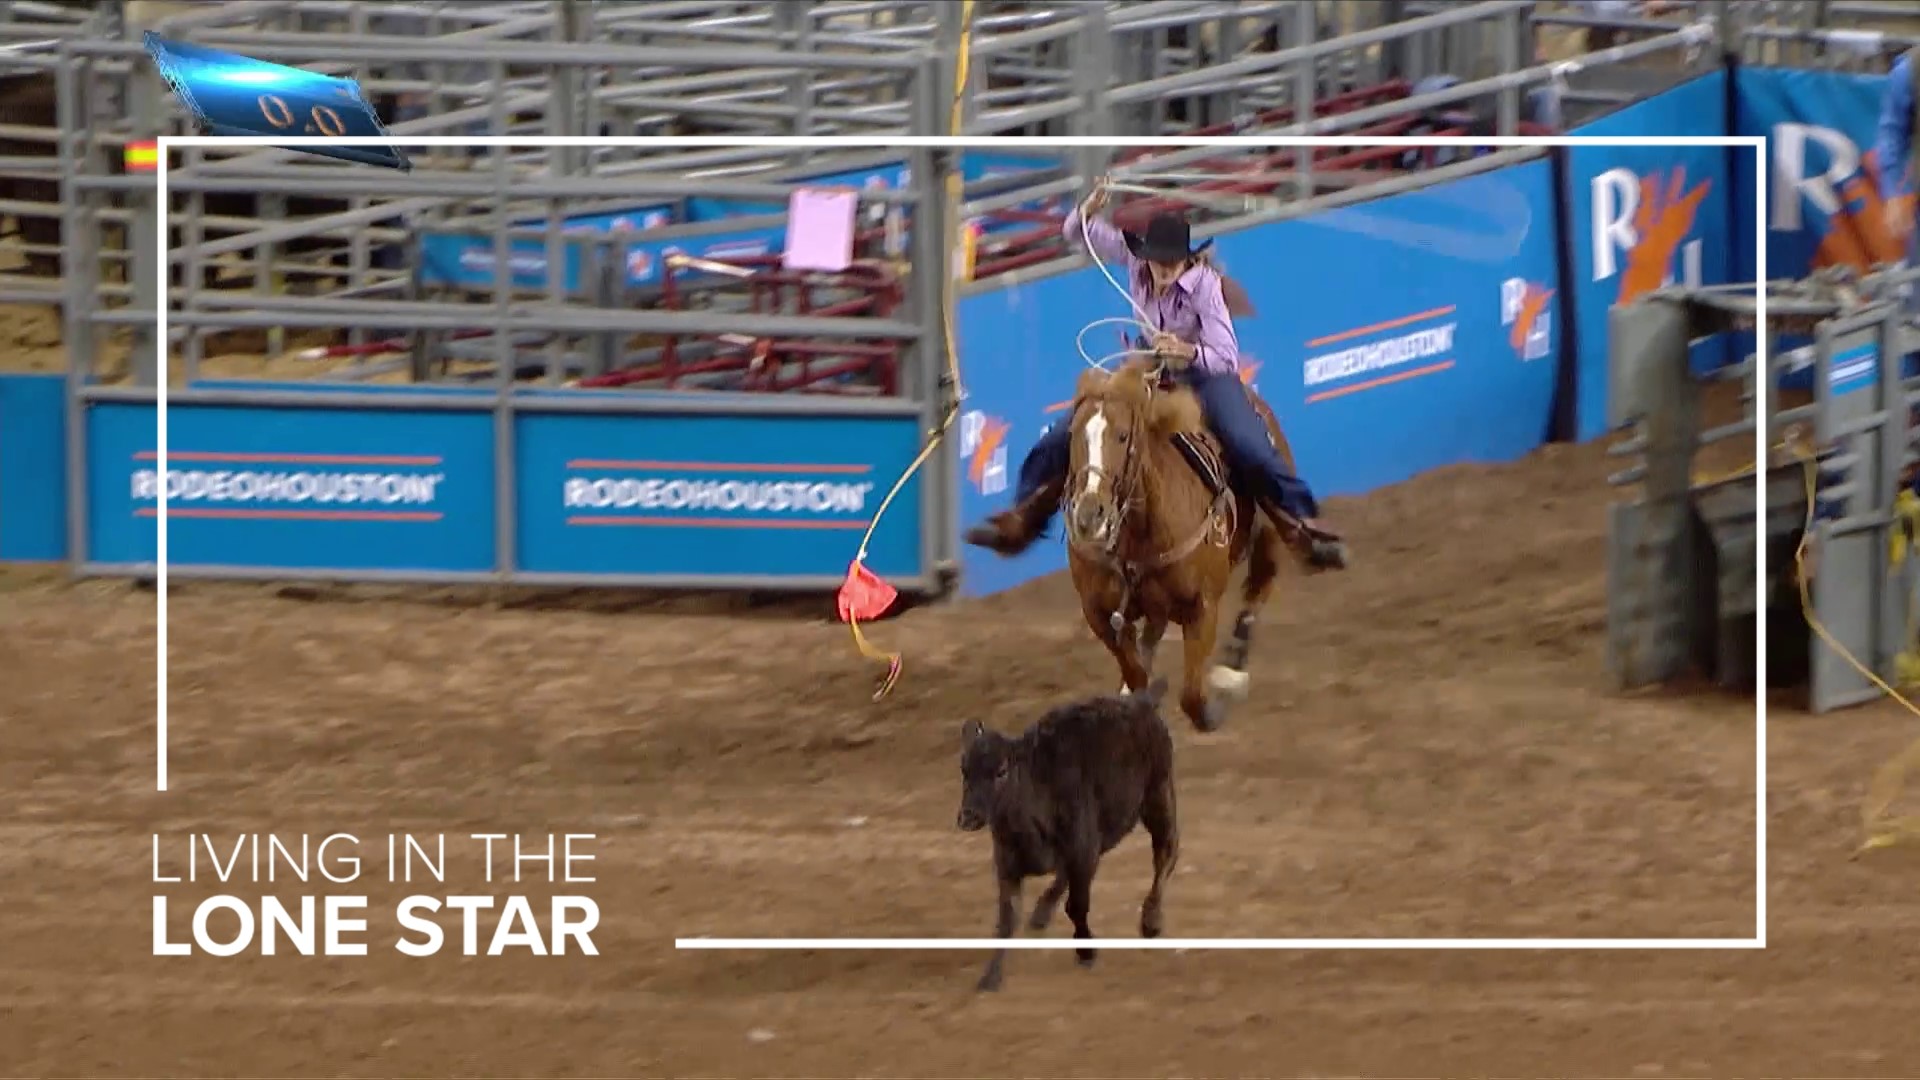 As a barrel racer, Taylor Hanchey came down the alley. Now she's shooting out of the box, trying to rope a calf in about 2 seconds.